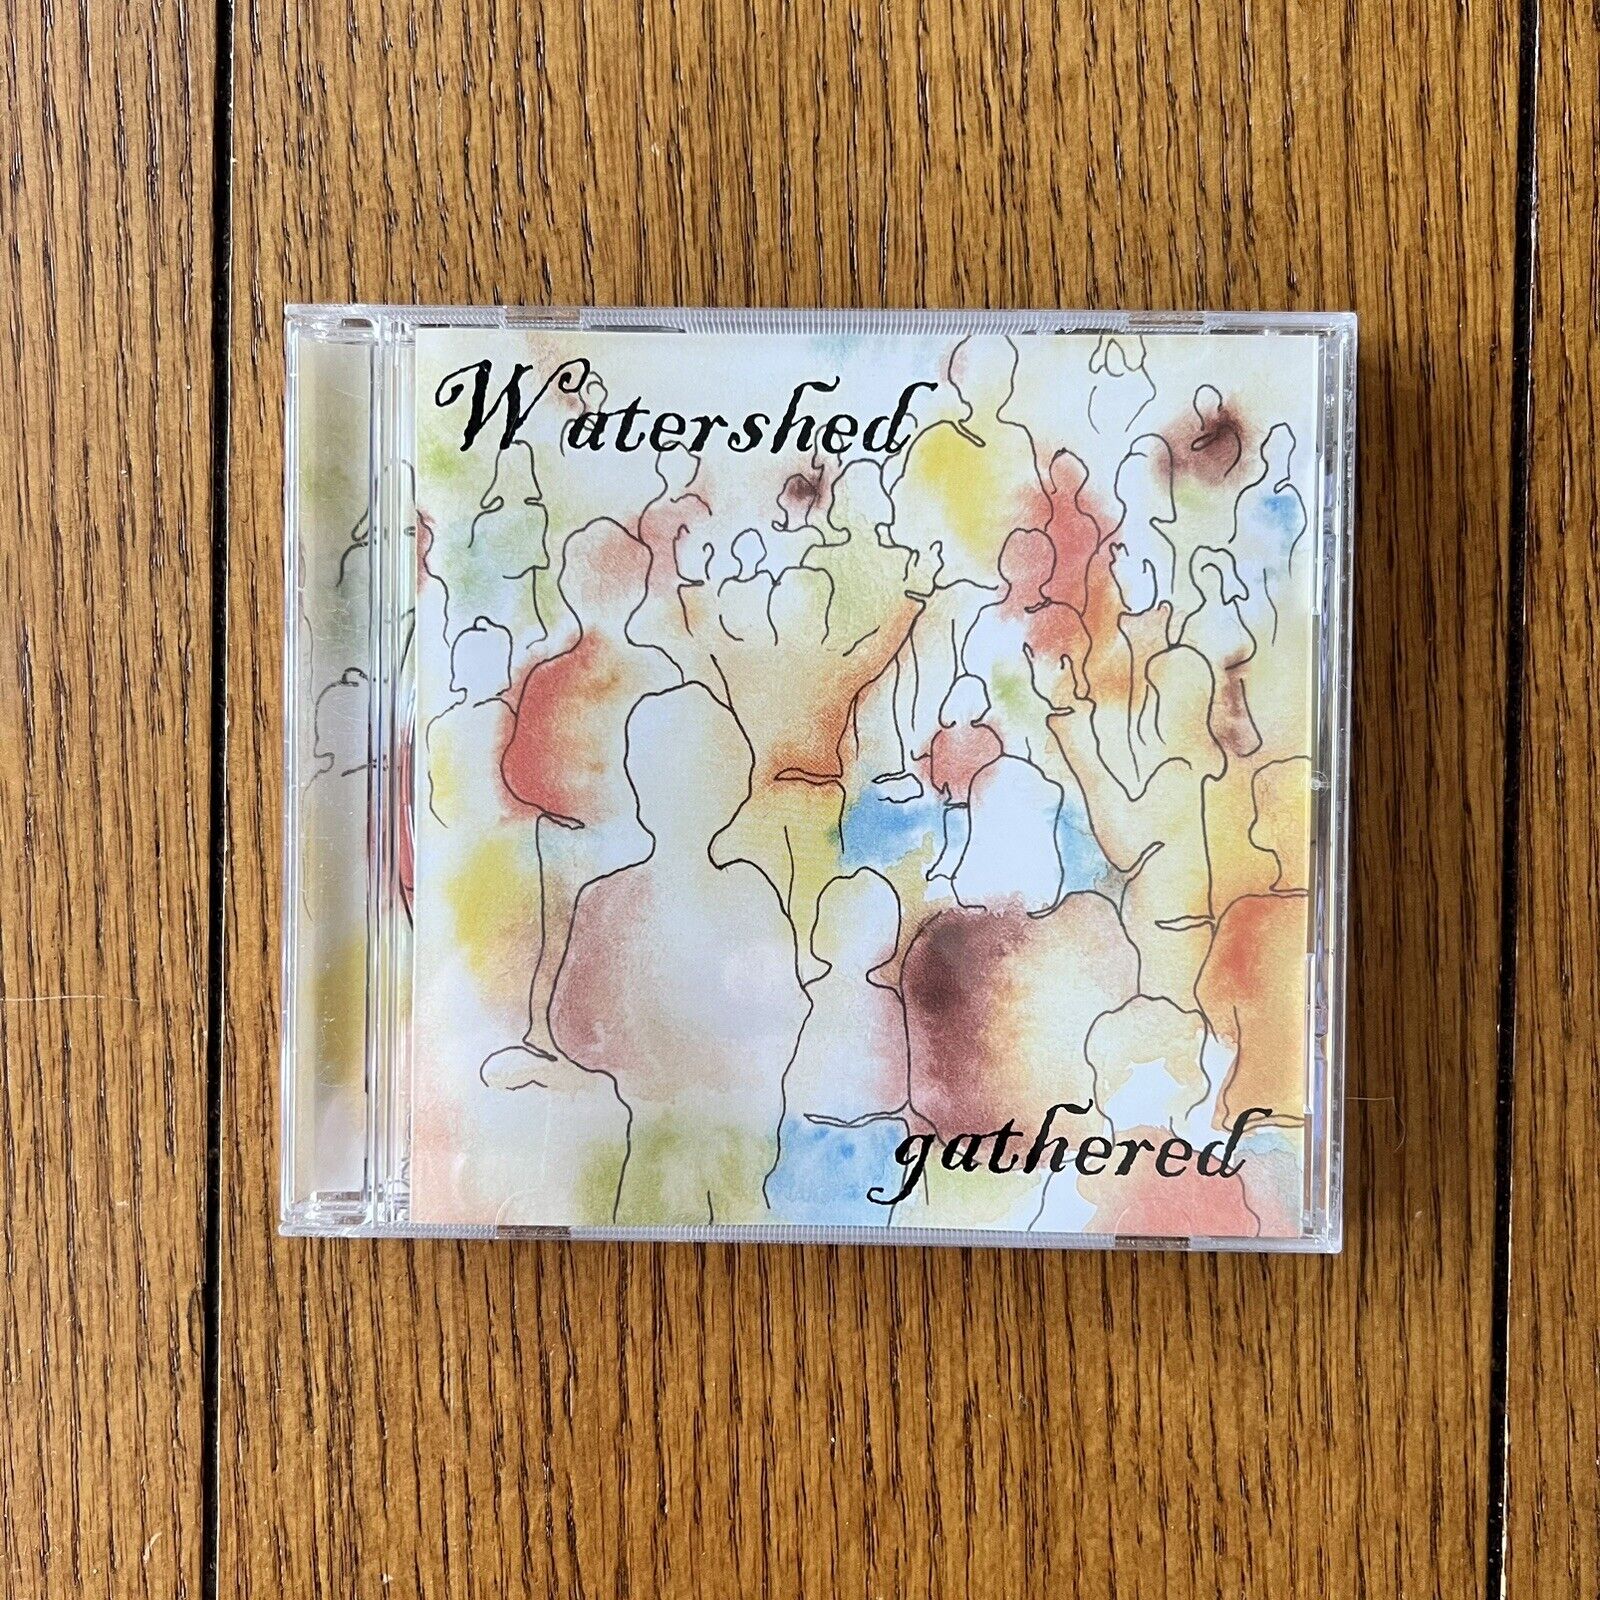 Watershed - Gathered CD